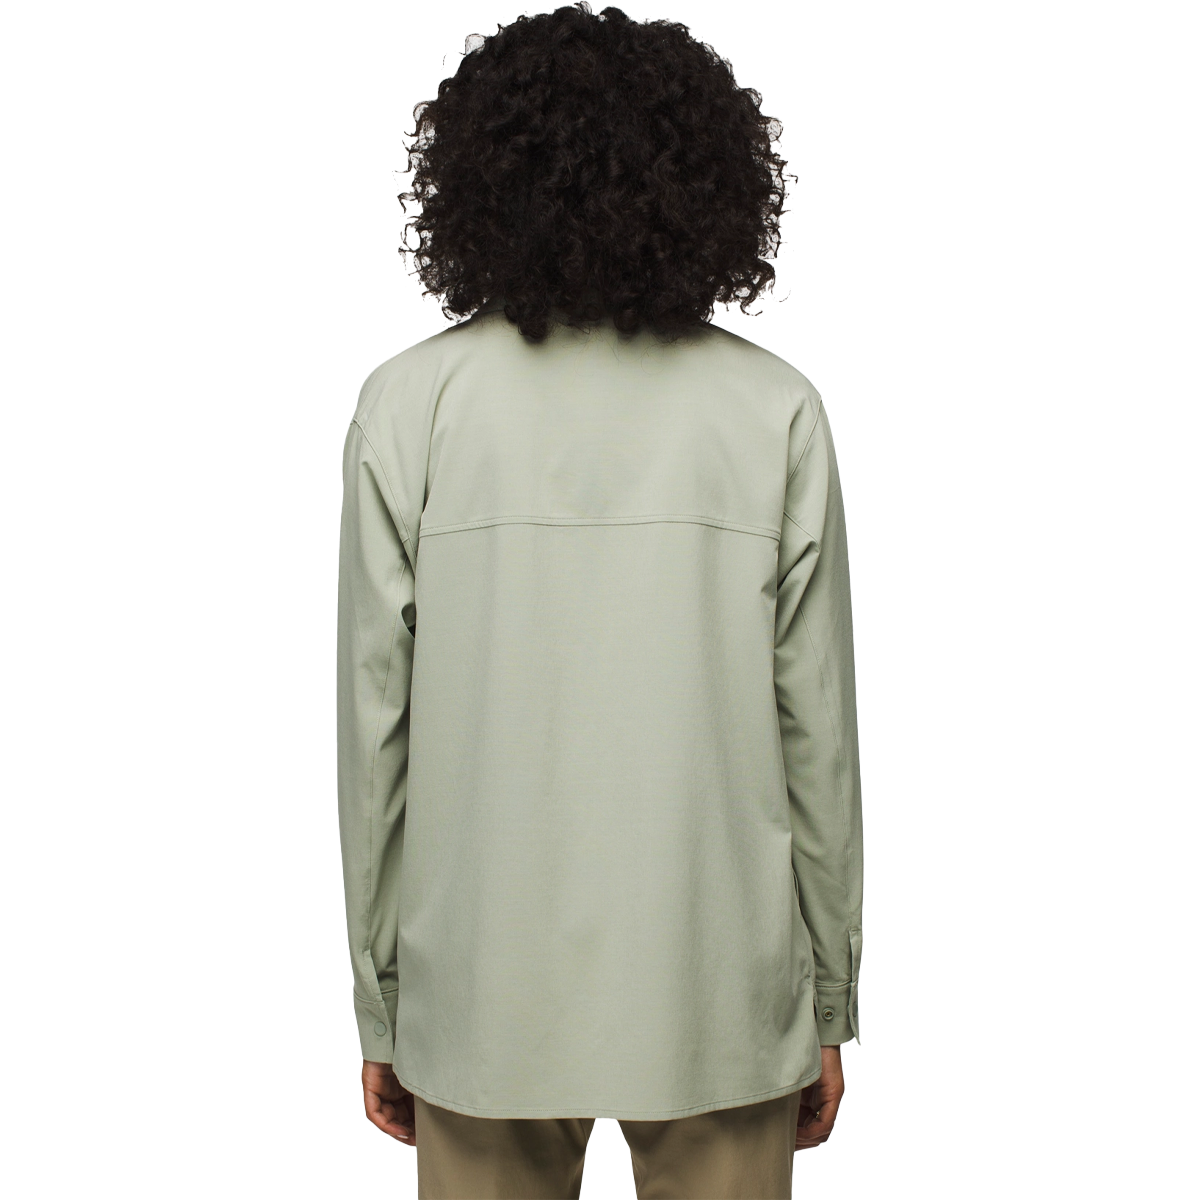 Women's Railay Long Sleeve Button Down alternate view